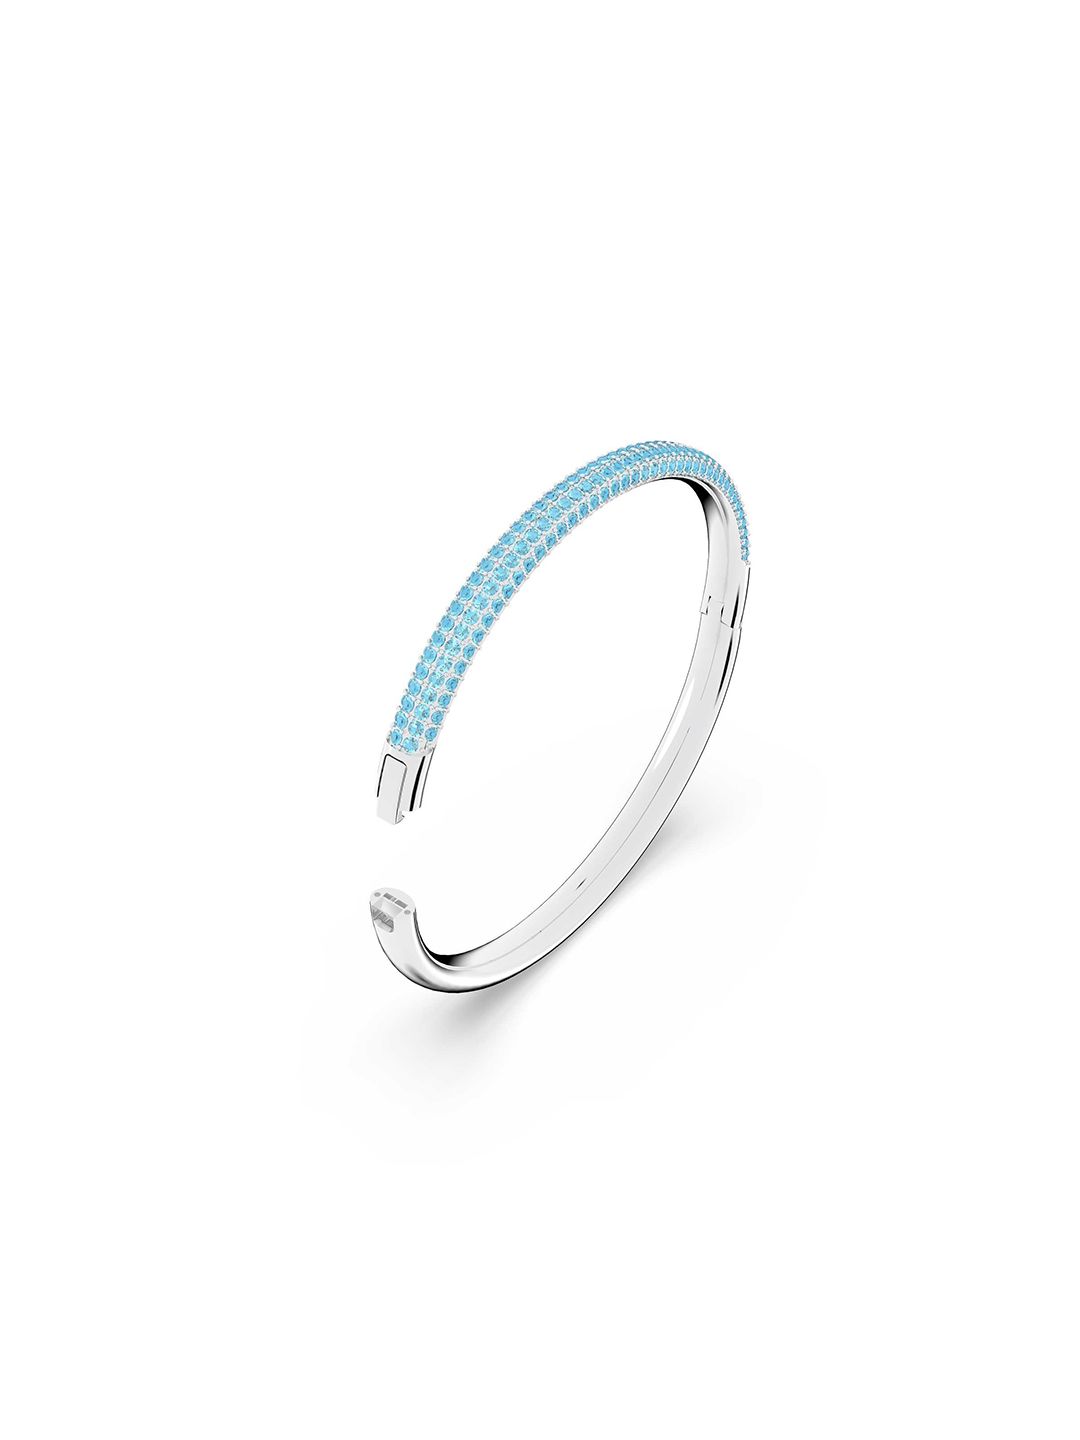 SWAROVSKI Women Silver-Toned & Blue Crystals Silver-Plated Bangle-Style Bracelet Price in India